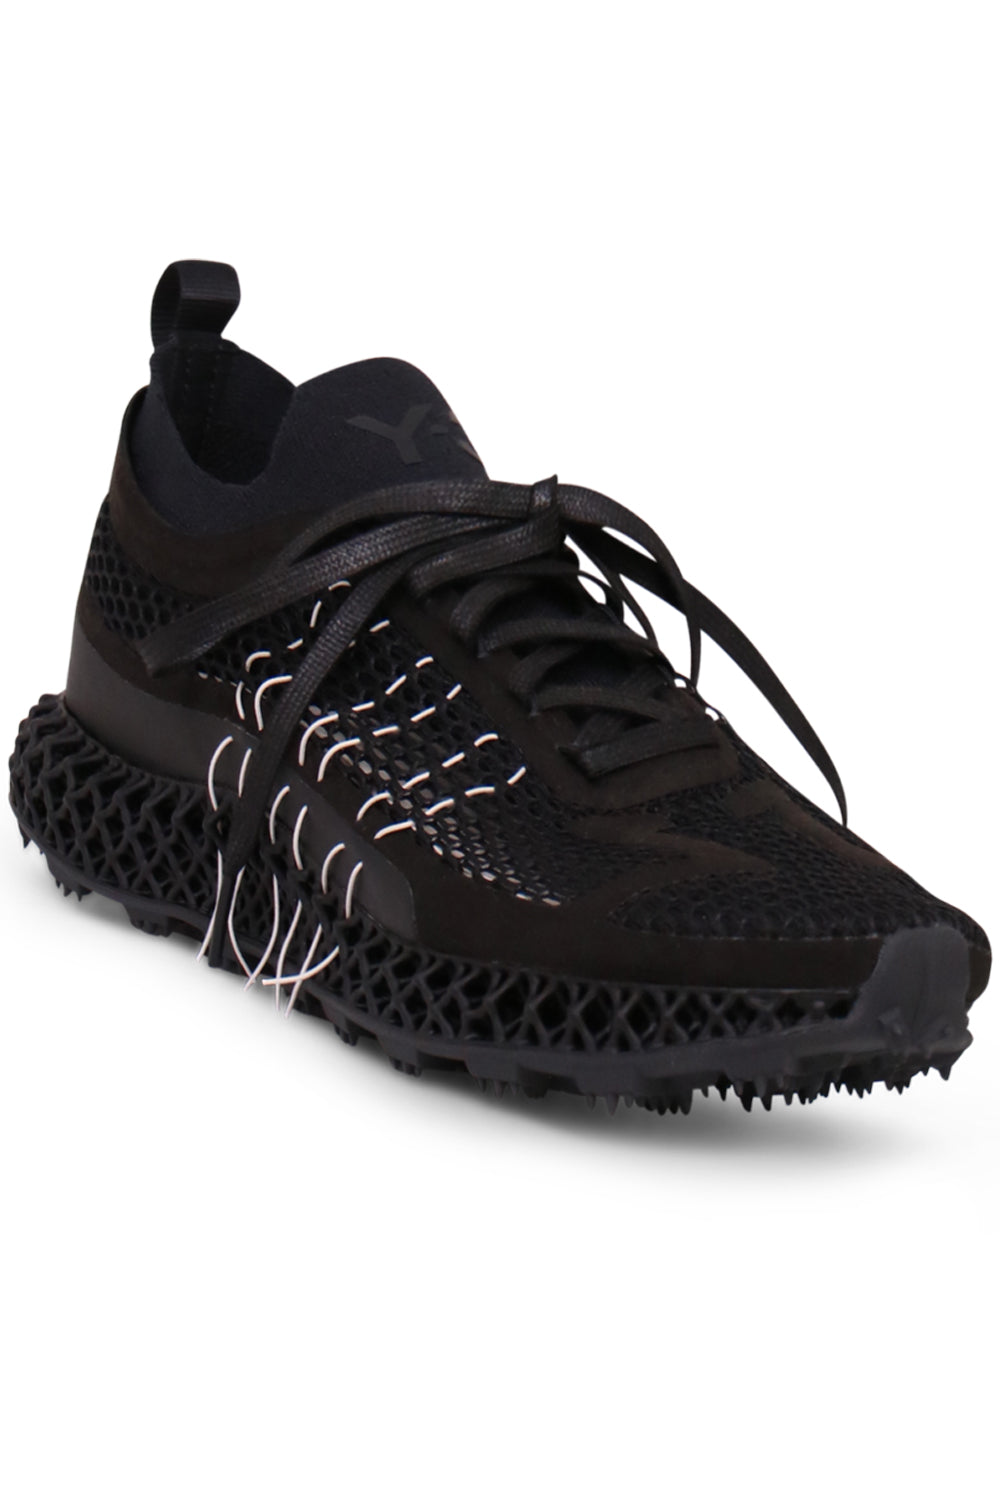 Y-3 SNEAKERS 4D HALO RUNNER | BLACK/OFF WHITE